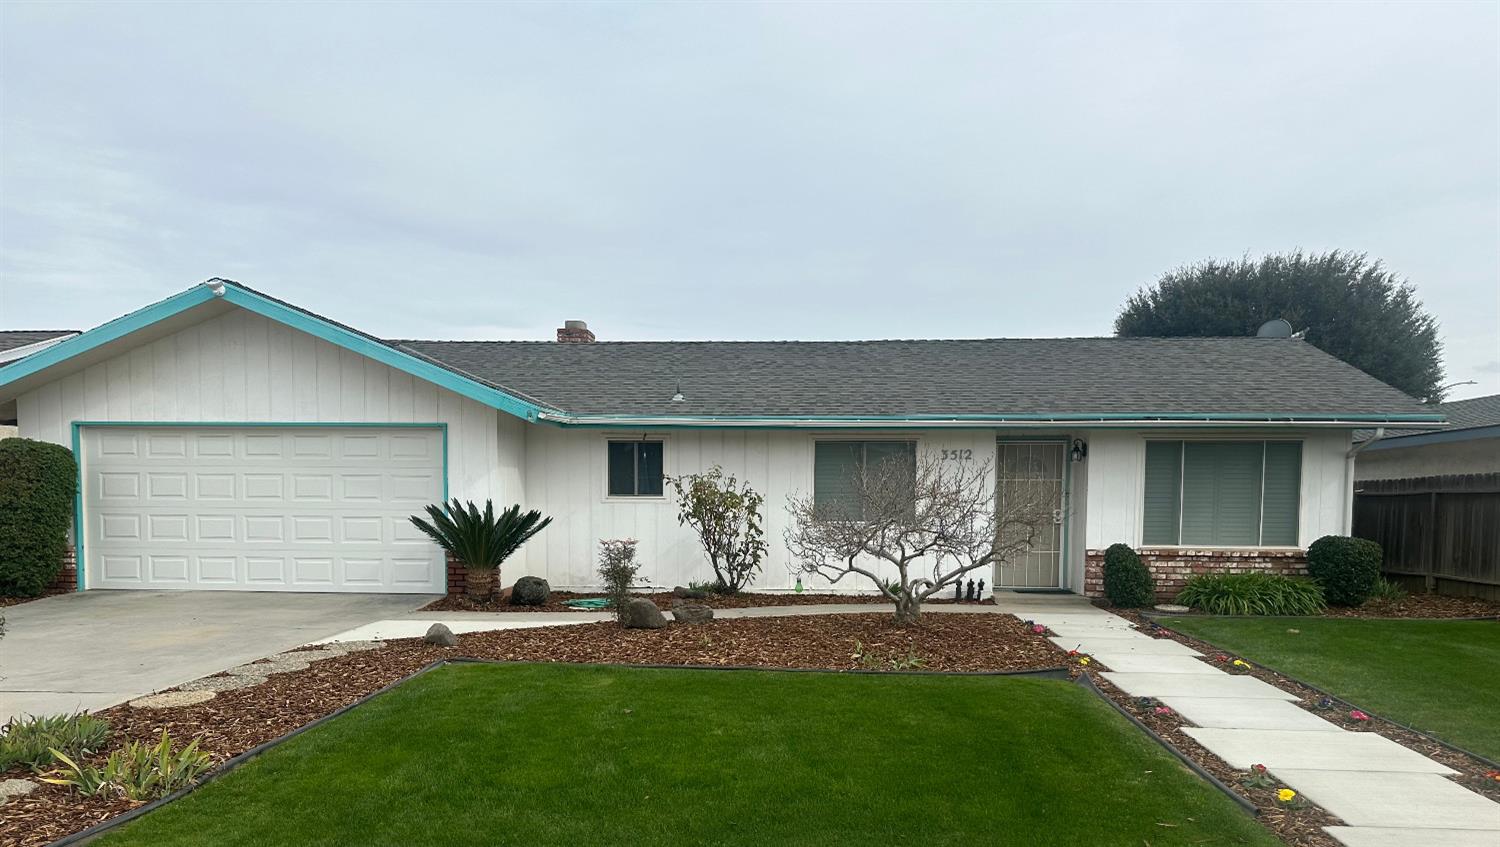 Photo of 3512 Willow St in Selma, CA